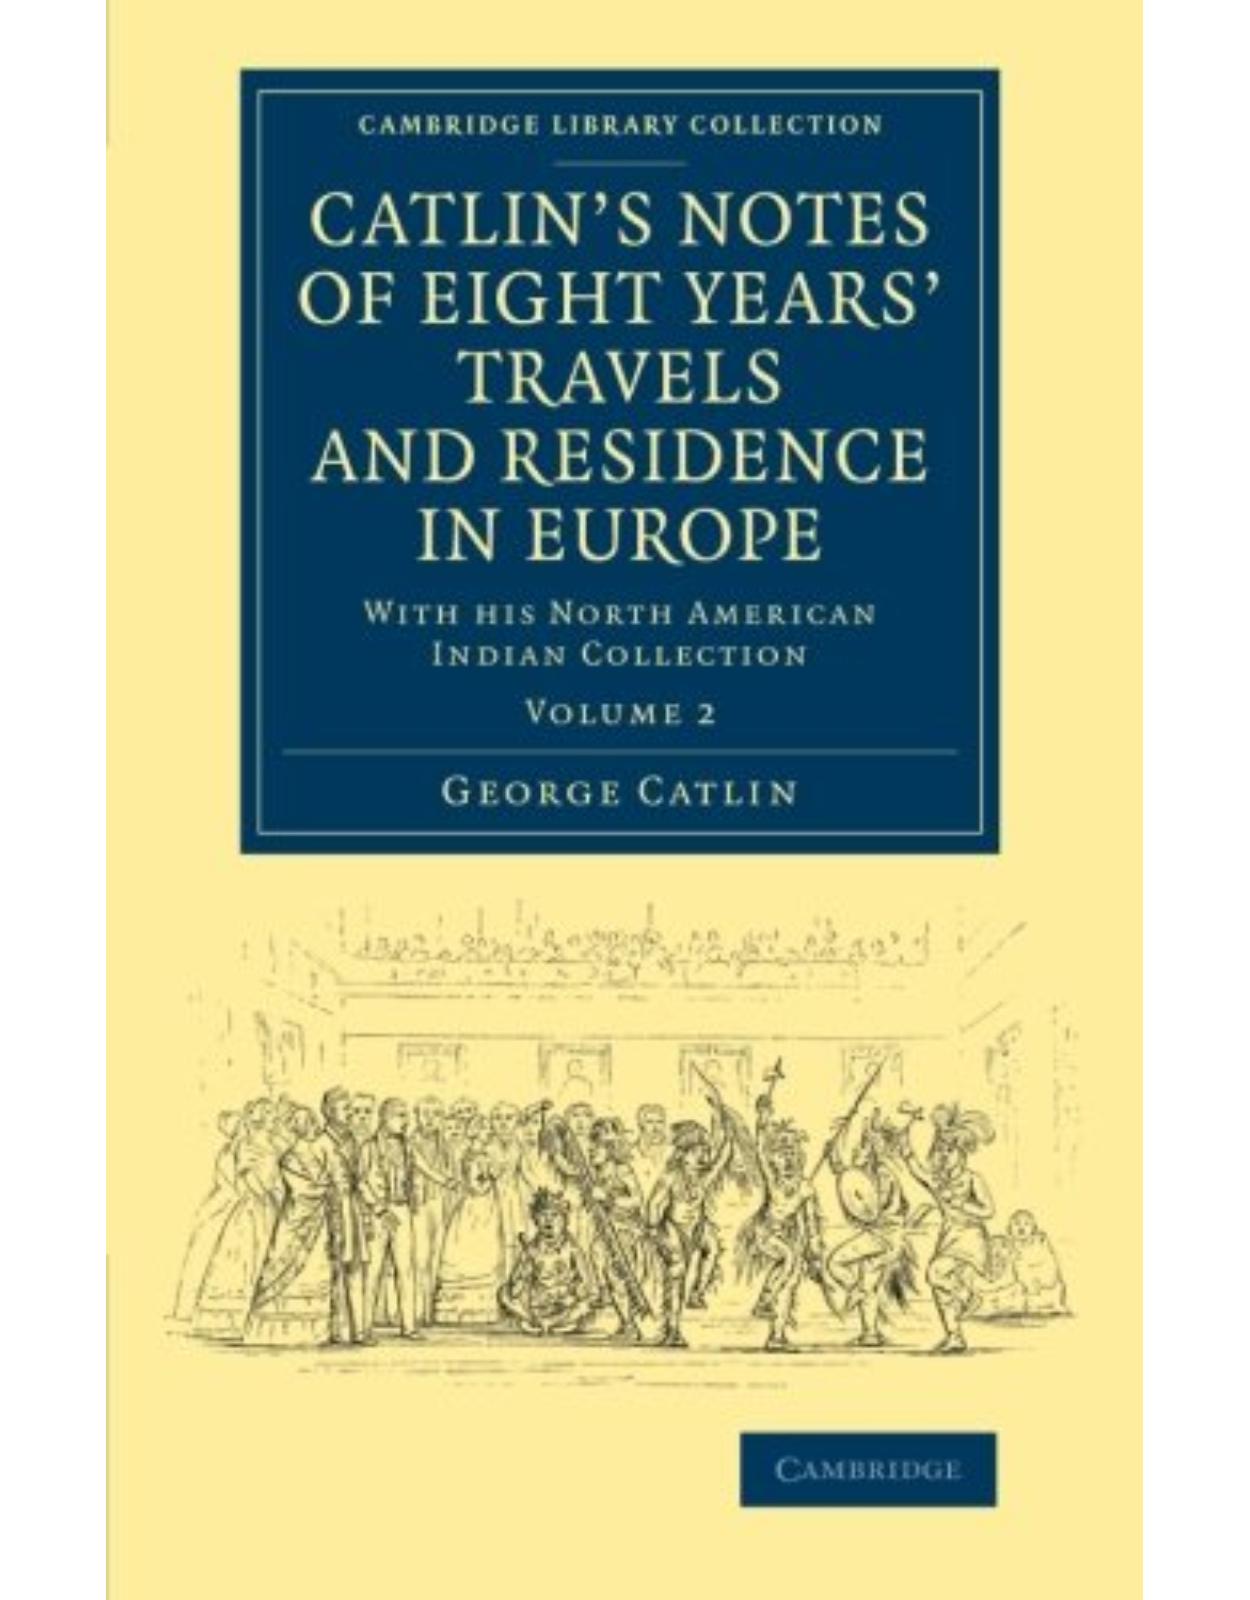 CatlinÂ’s Notes of Eight YearsÂ’ Travels and Residence in Europe: Volume 2: With his North American Indian Collection (Cambridge Library Collection - North American History)